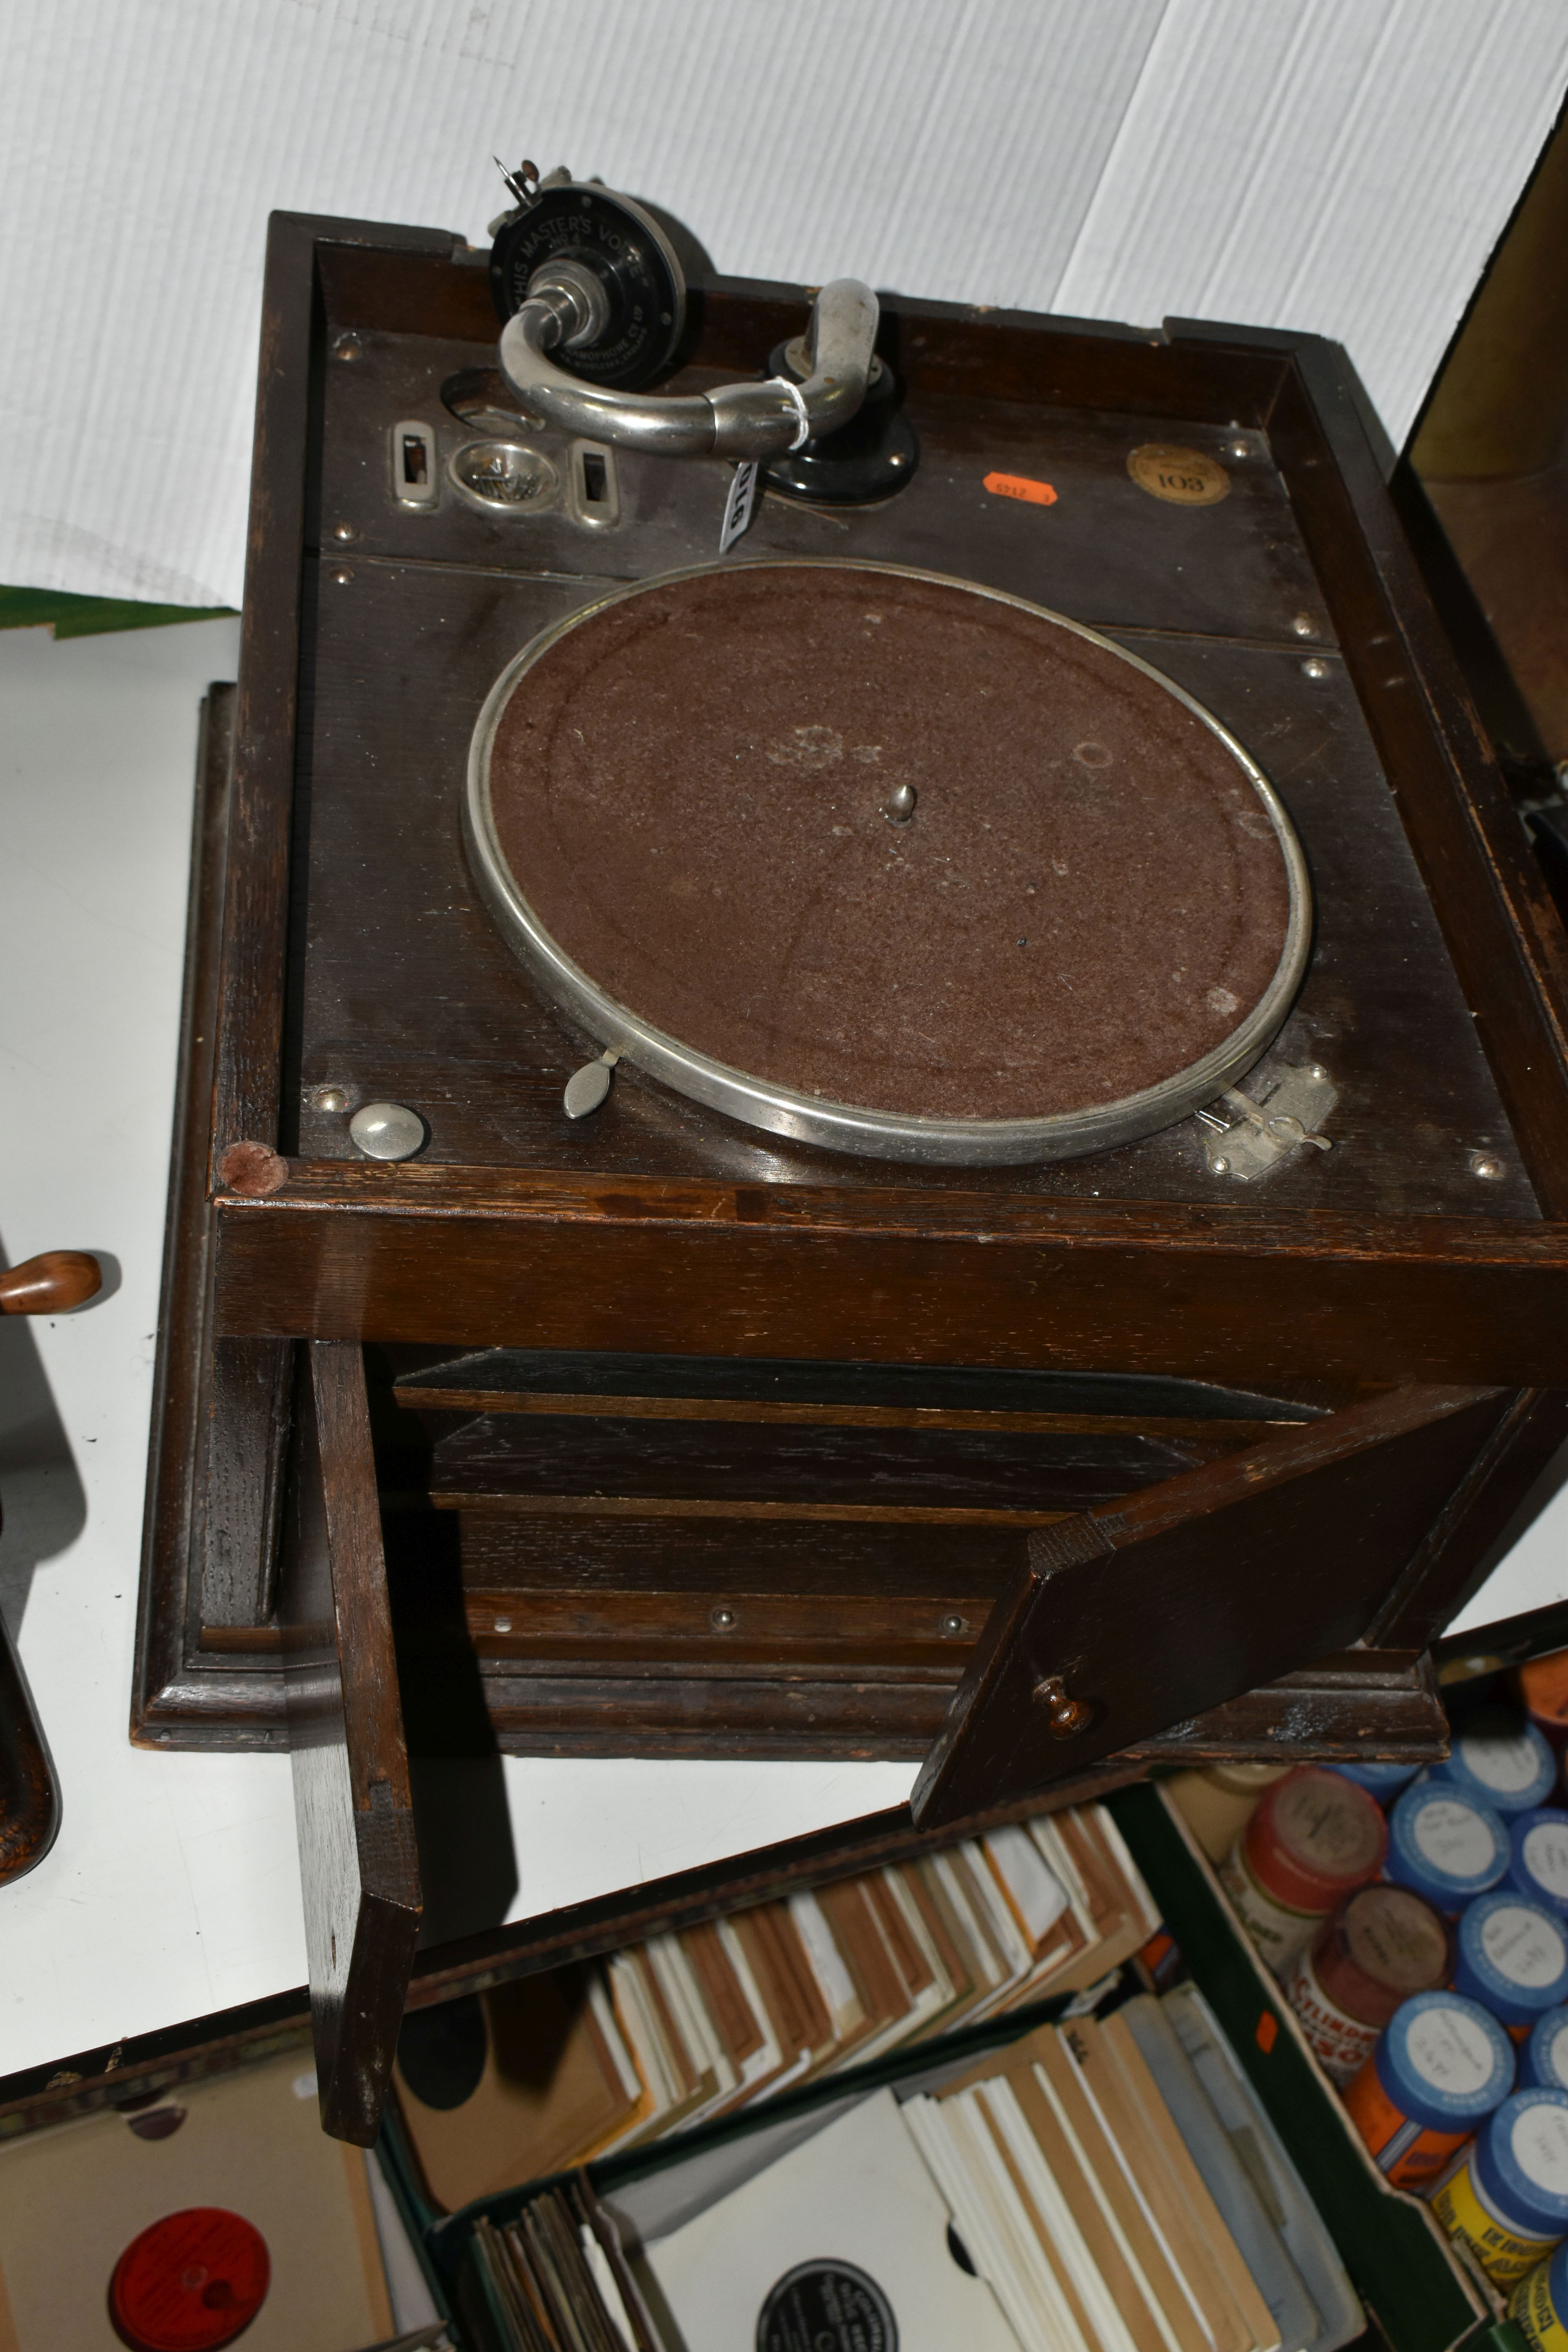 A HMV MODEL 103 GRAMOPHONE, lid is missing, runs when wound - Image 4 of 7